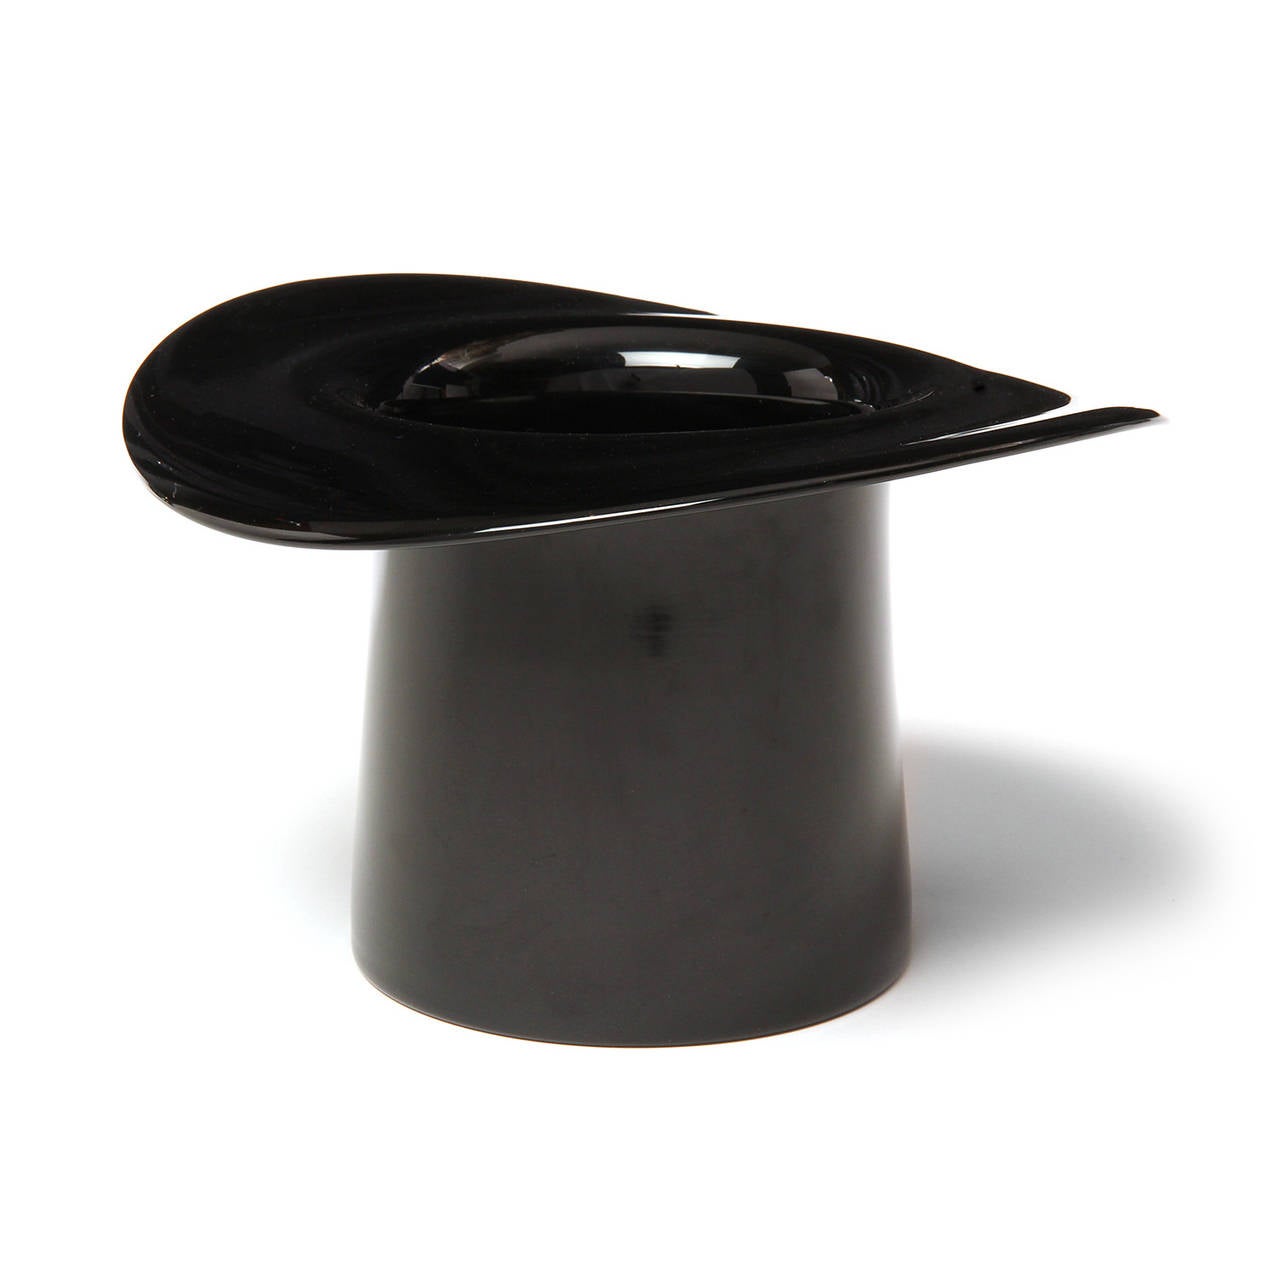 A delightful and finely rendered mouth-blown unique top hat crafted of black glass and useful as a sculpture, vase or champagne cooler.